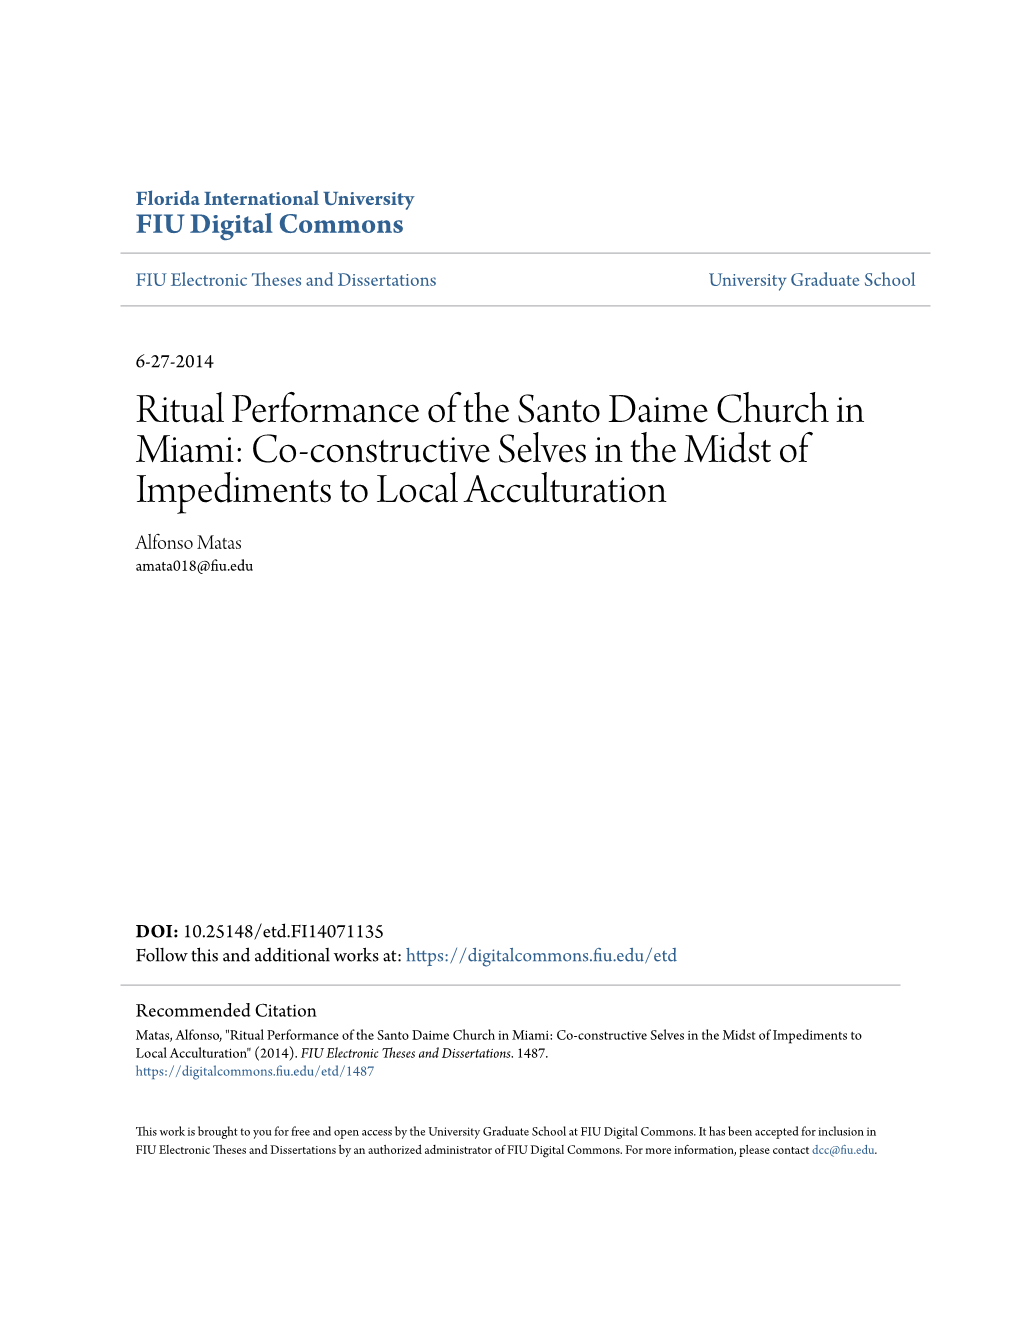 Ritual Performance of the Santo Daime Church in Miami: Co-Constructive Selves in the Midst of Impediments to Local Acculturation Alfonso Matas Amata018@Fiu.Edu